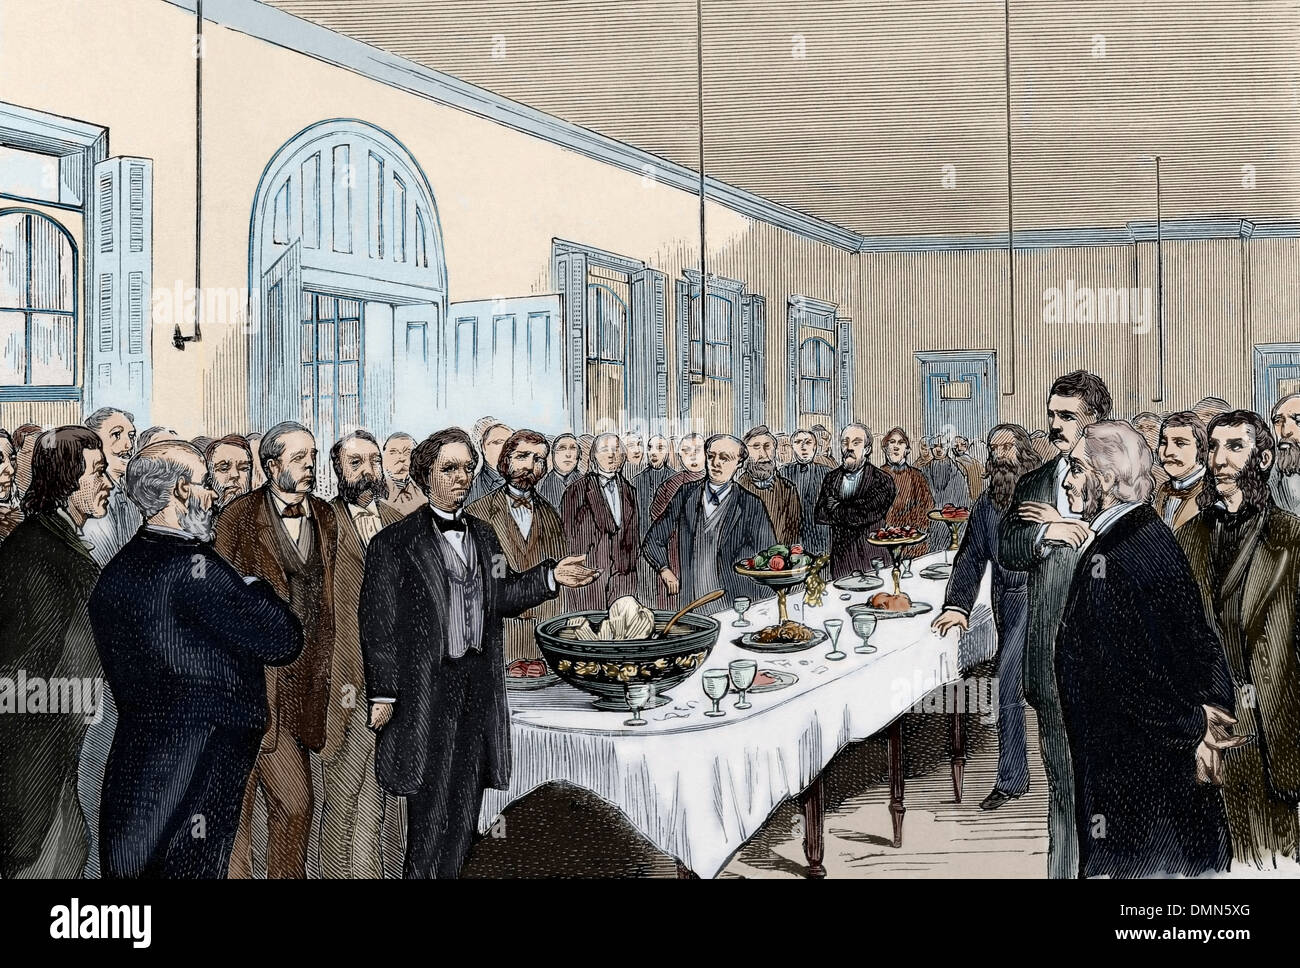 Samuel Hahnemann (1755-1843). German physician. New York. 50th Anniversary of the introduction of homeopathy. Banquet. Colored. Stock Photo